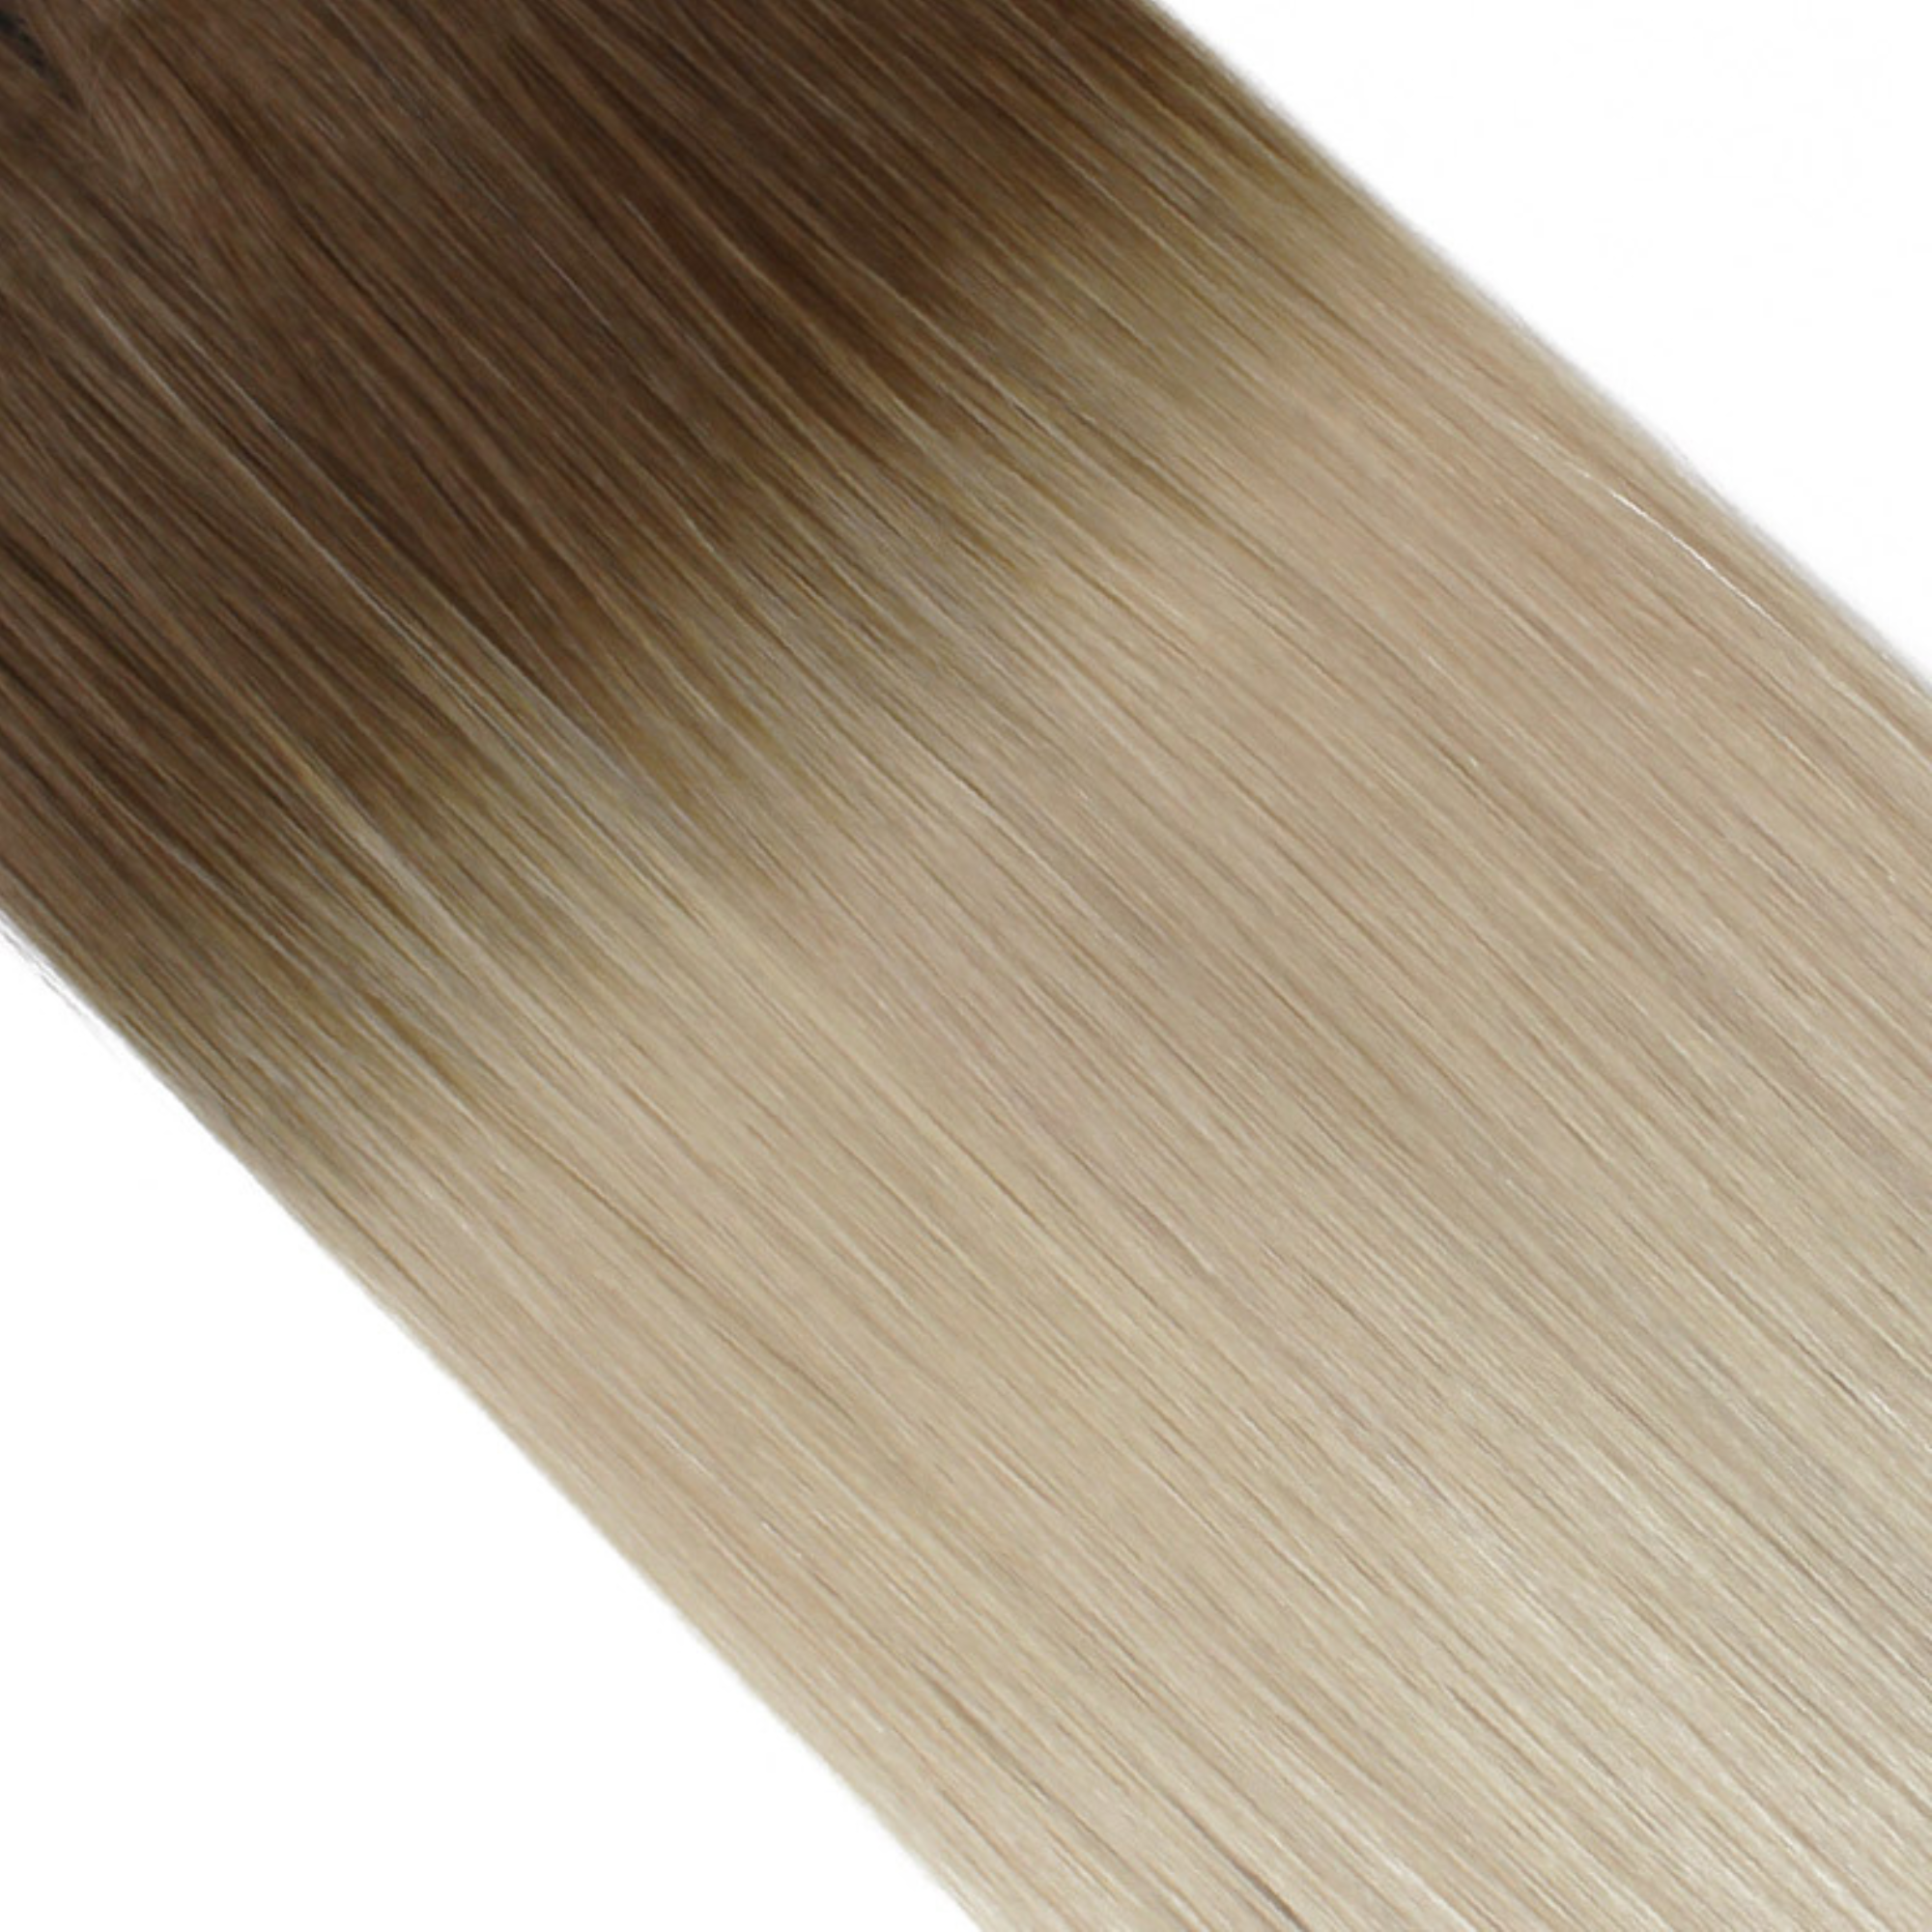 "hair rehab london 20" length 180 grams weight luxe clip-in hair extensions shade titled rooted blonde af"